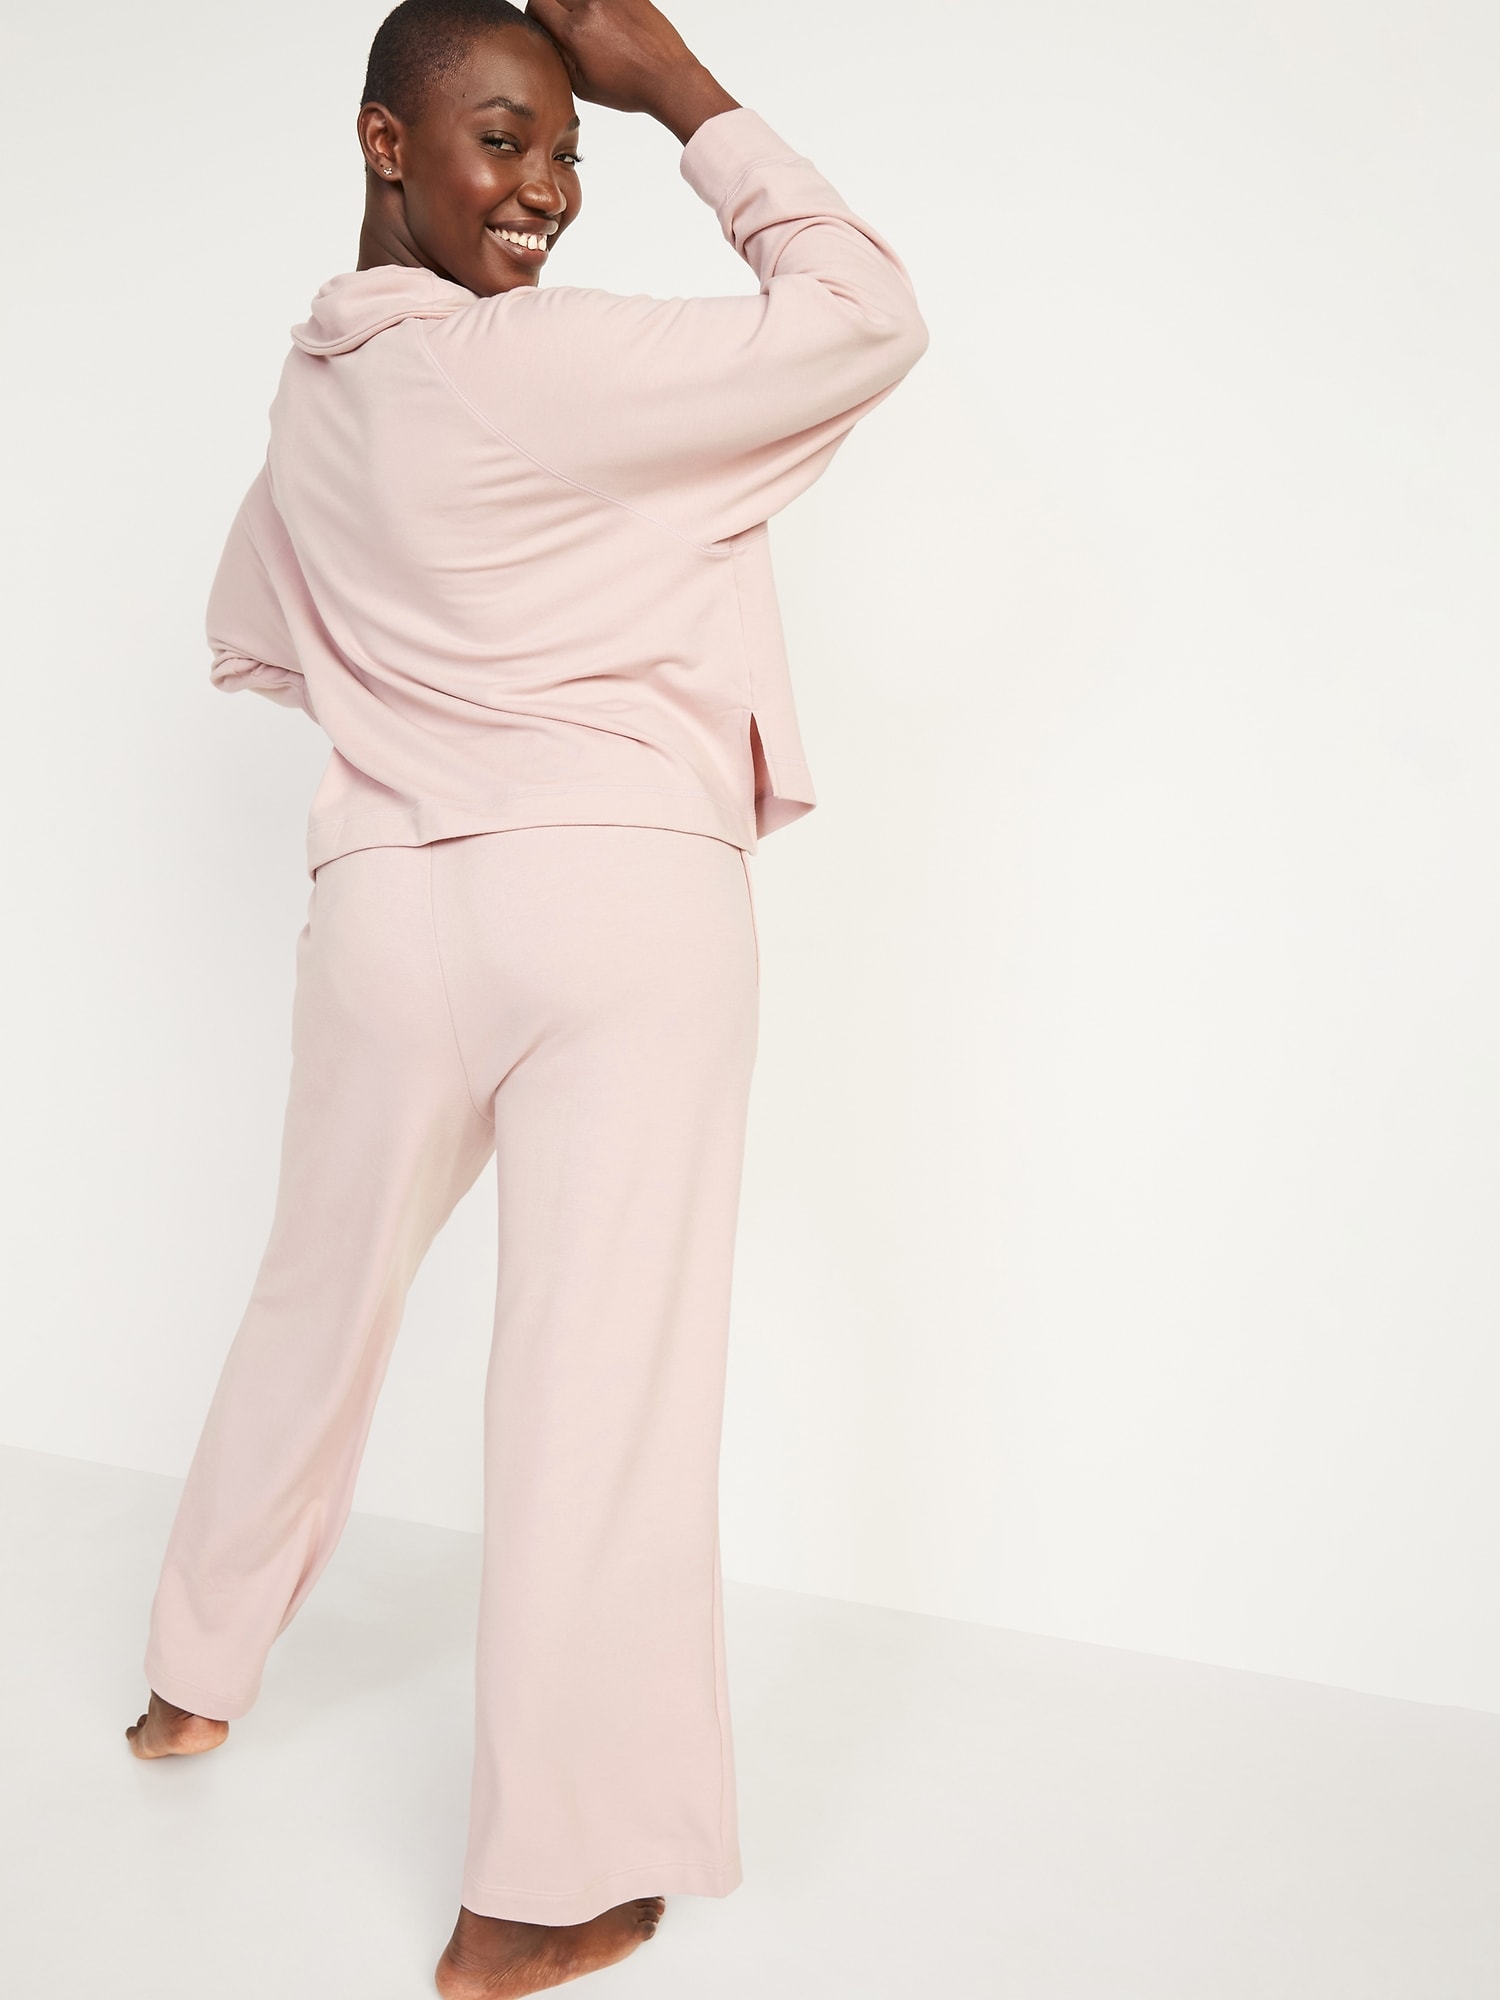 High-Waisted Cozy-Knit Wide-Leg Pajama Pants for Women